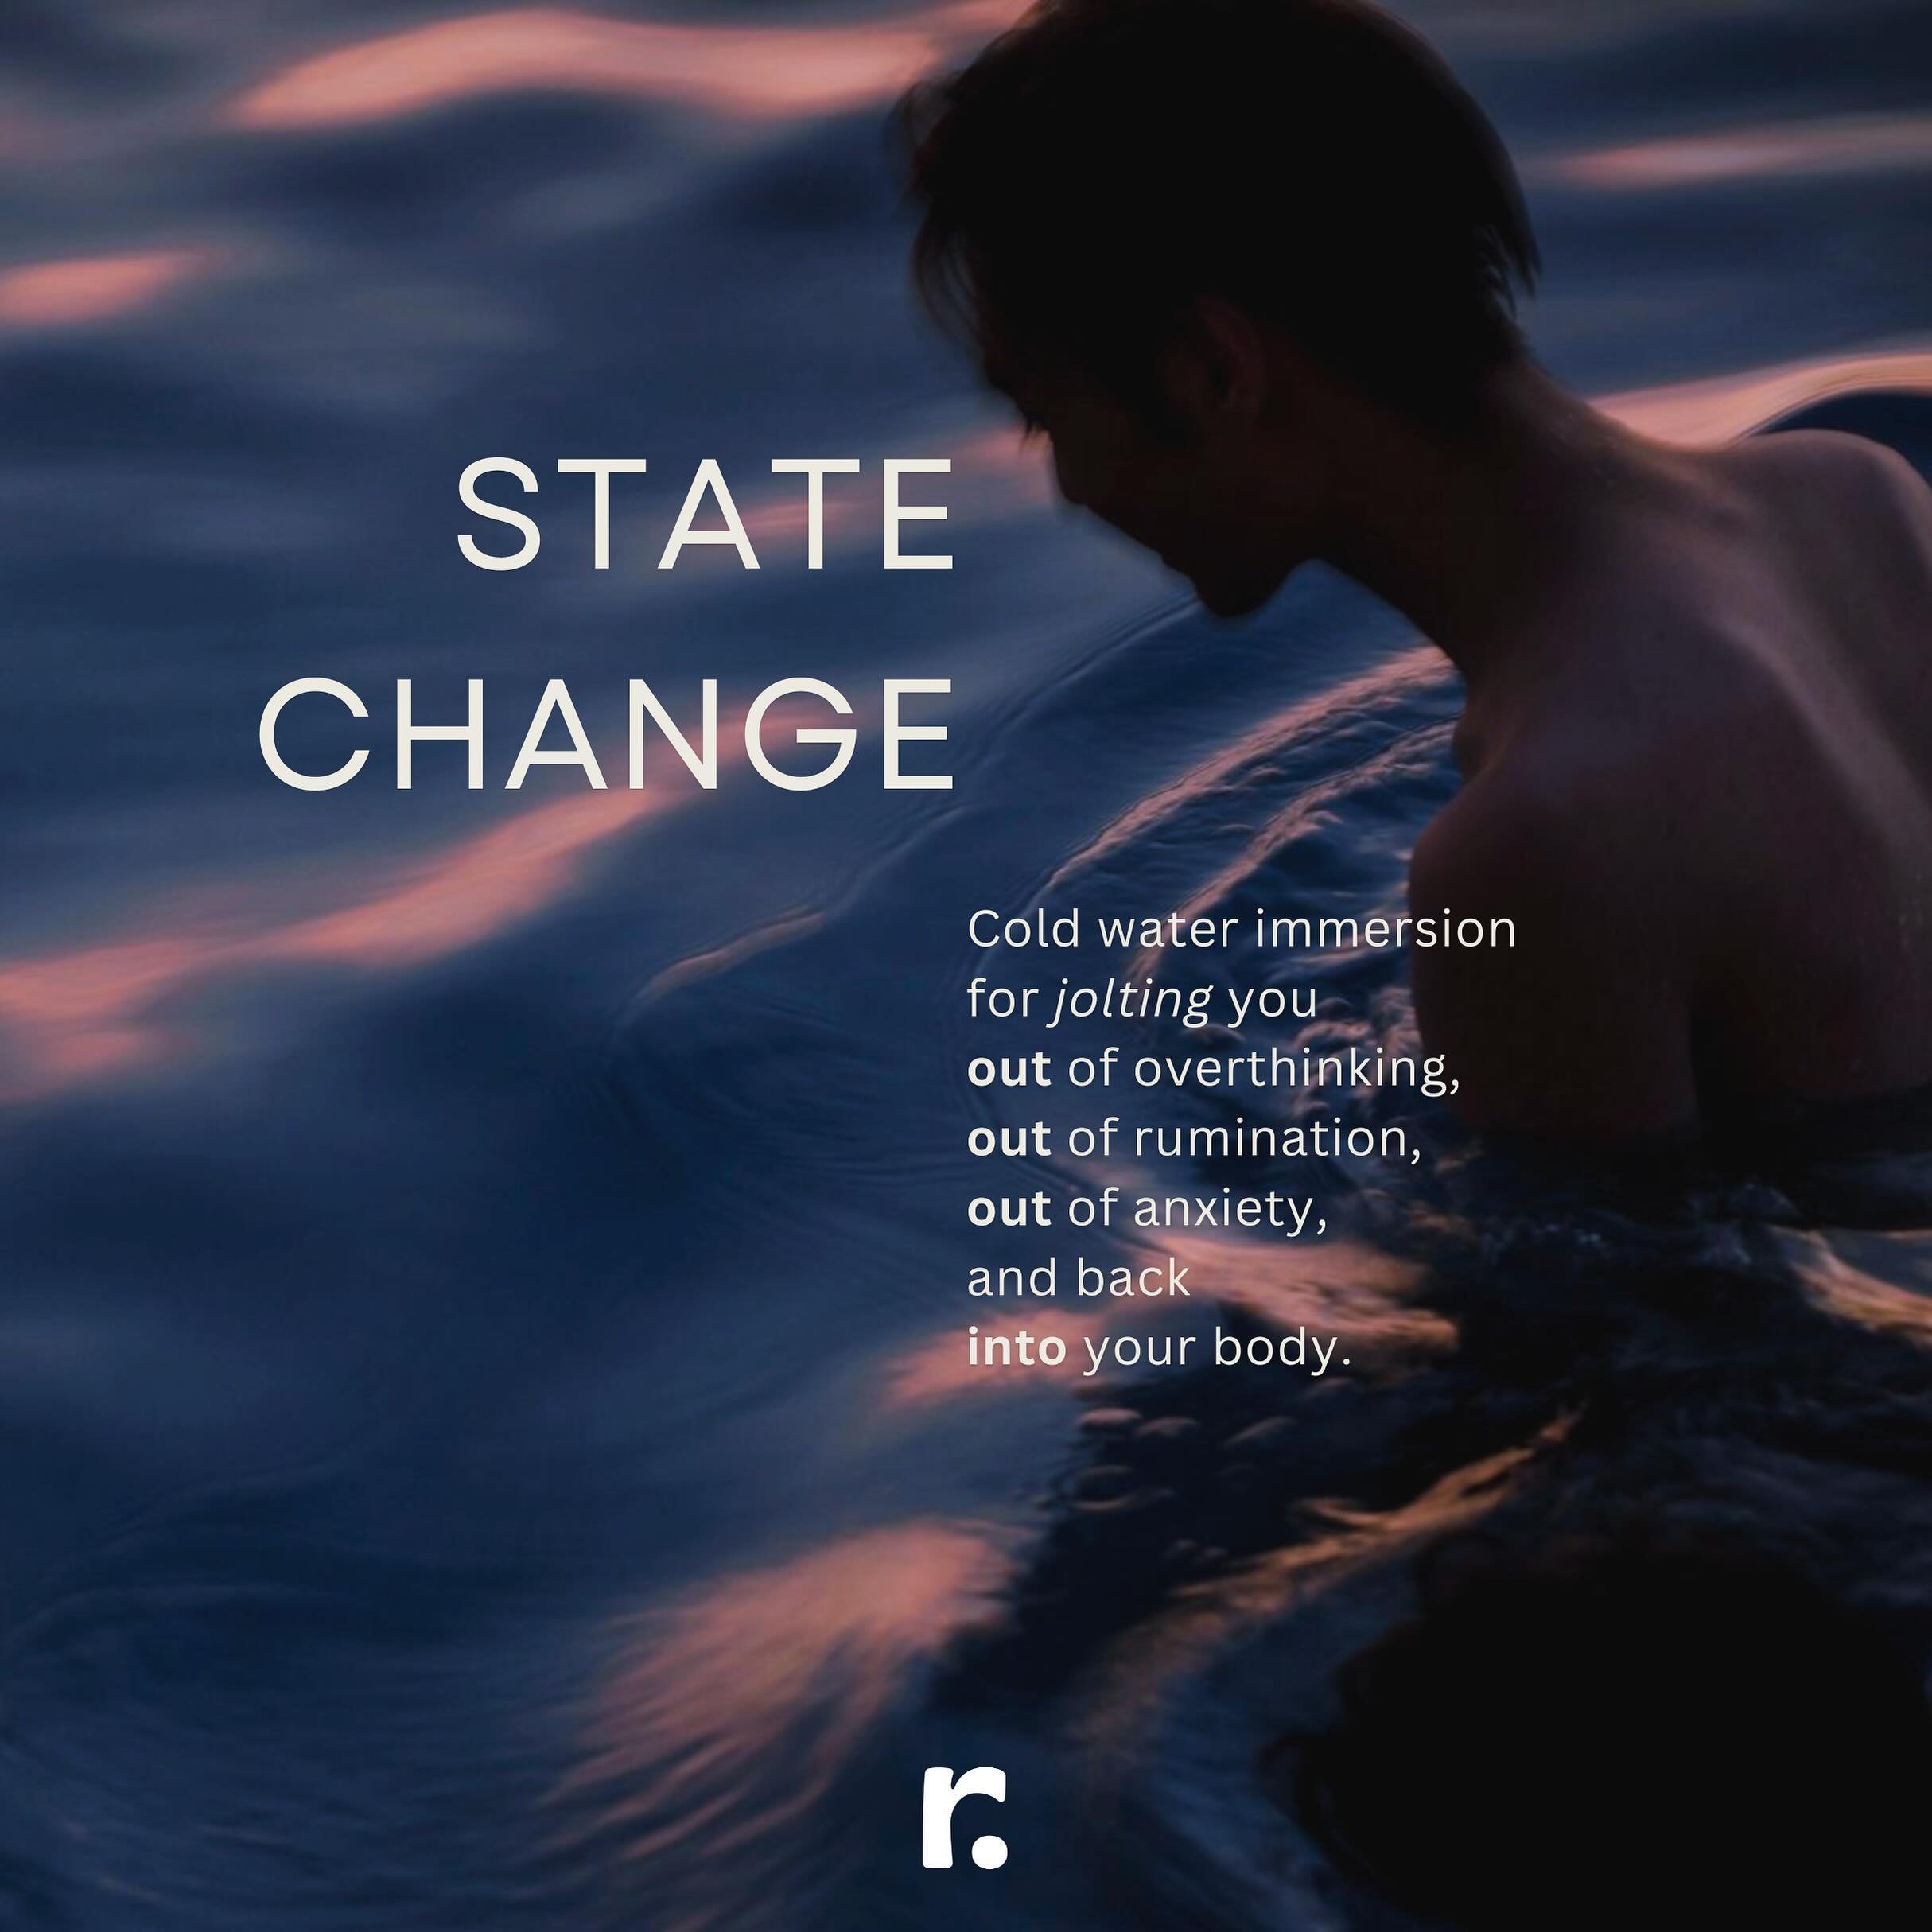 It&rsquo;s all about that instant STATE CHANGE. 🌊💥 

It&rsquo;s not just about braving the cold&mdash;it&rsquo;s about jolting yourself out of overthinking, cutting through the noise of rumination, and silencing the anxieties. 

Finding space.

It&